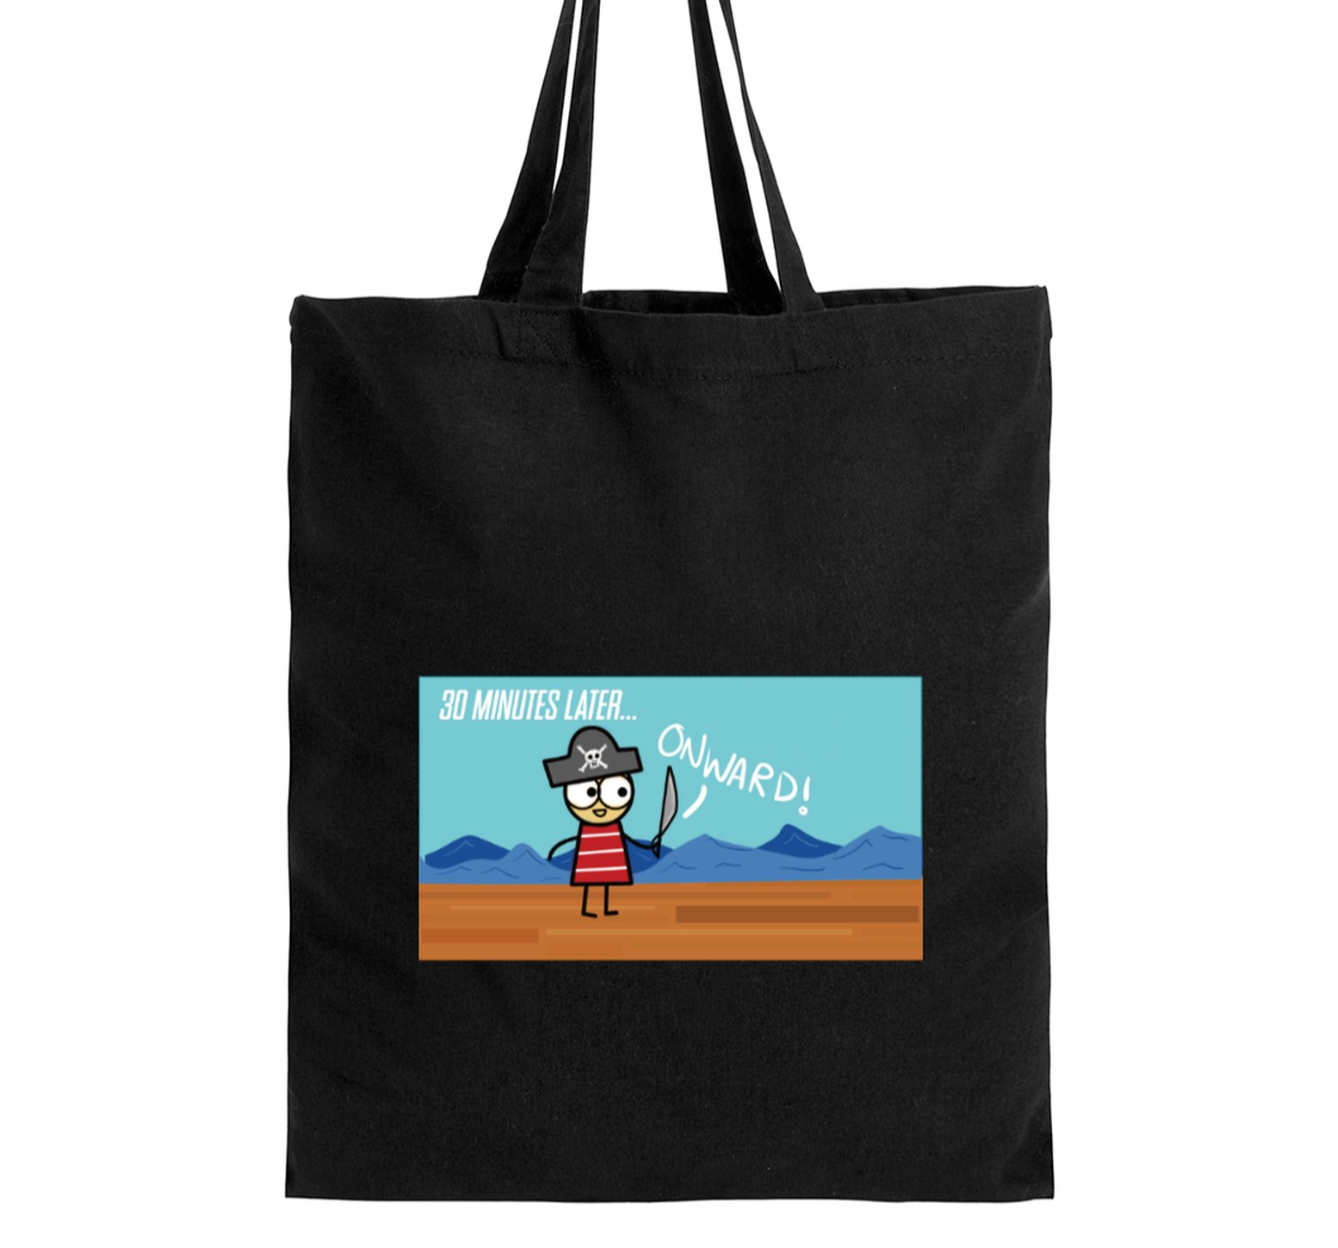 30 Seconds Later Tote Bag